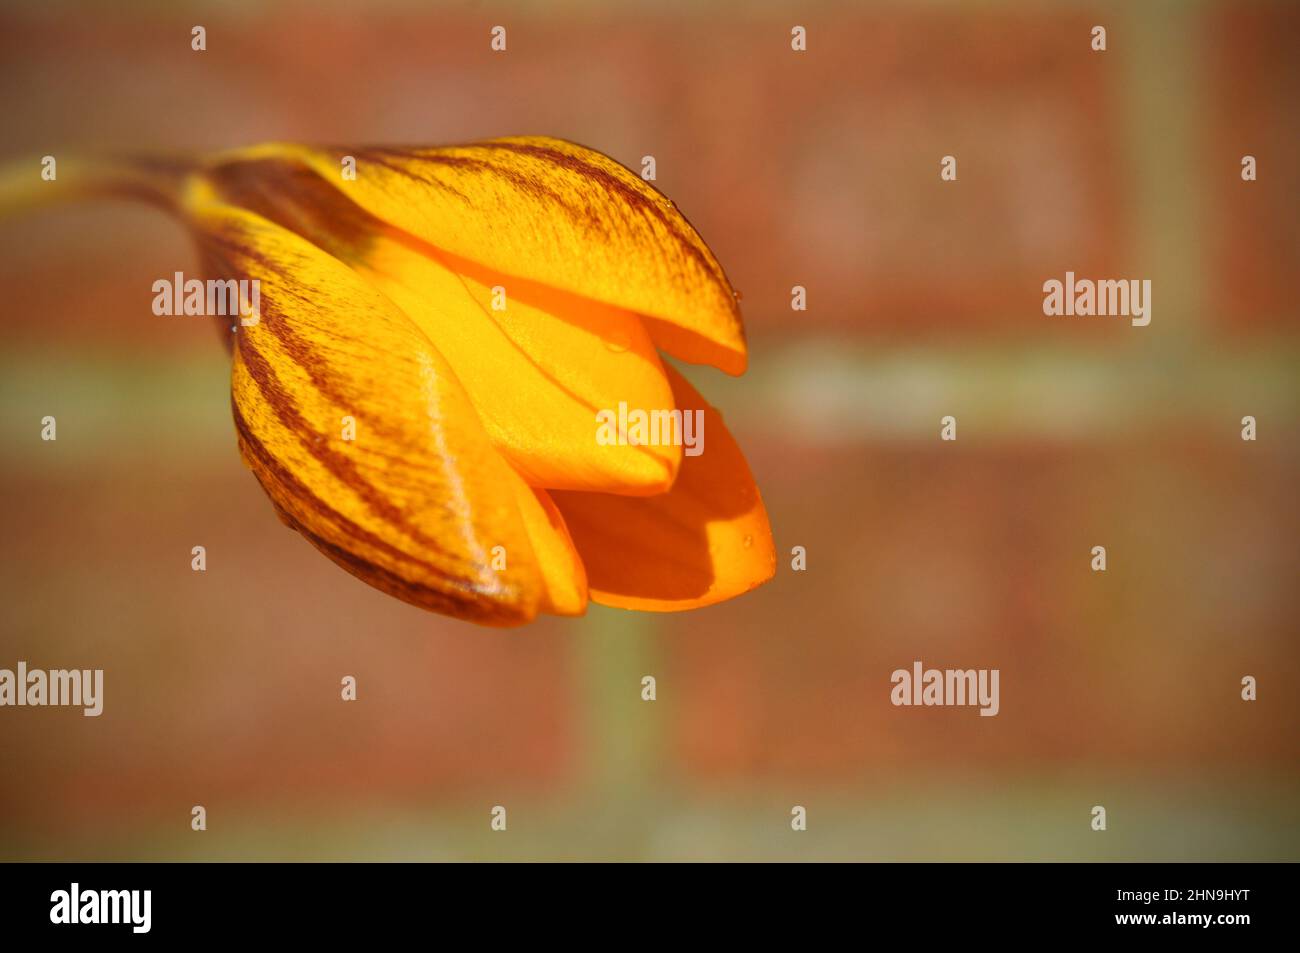 A close up of a yellow and maroon striped spring crocus flower (Gypsy Girl) held against a brick wall Stock Photo